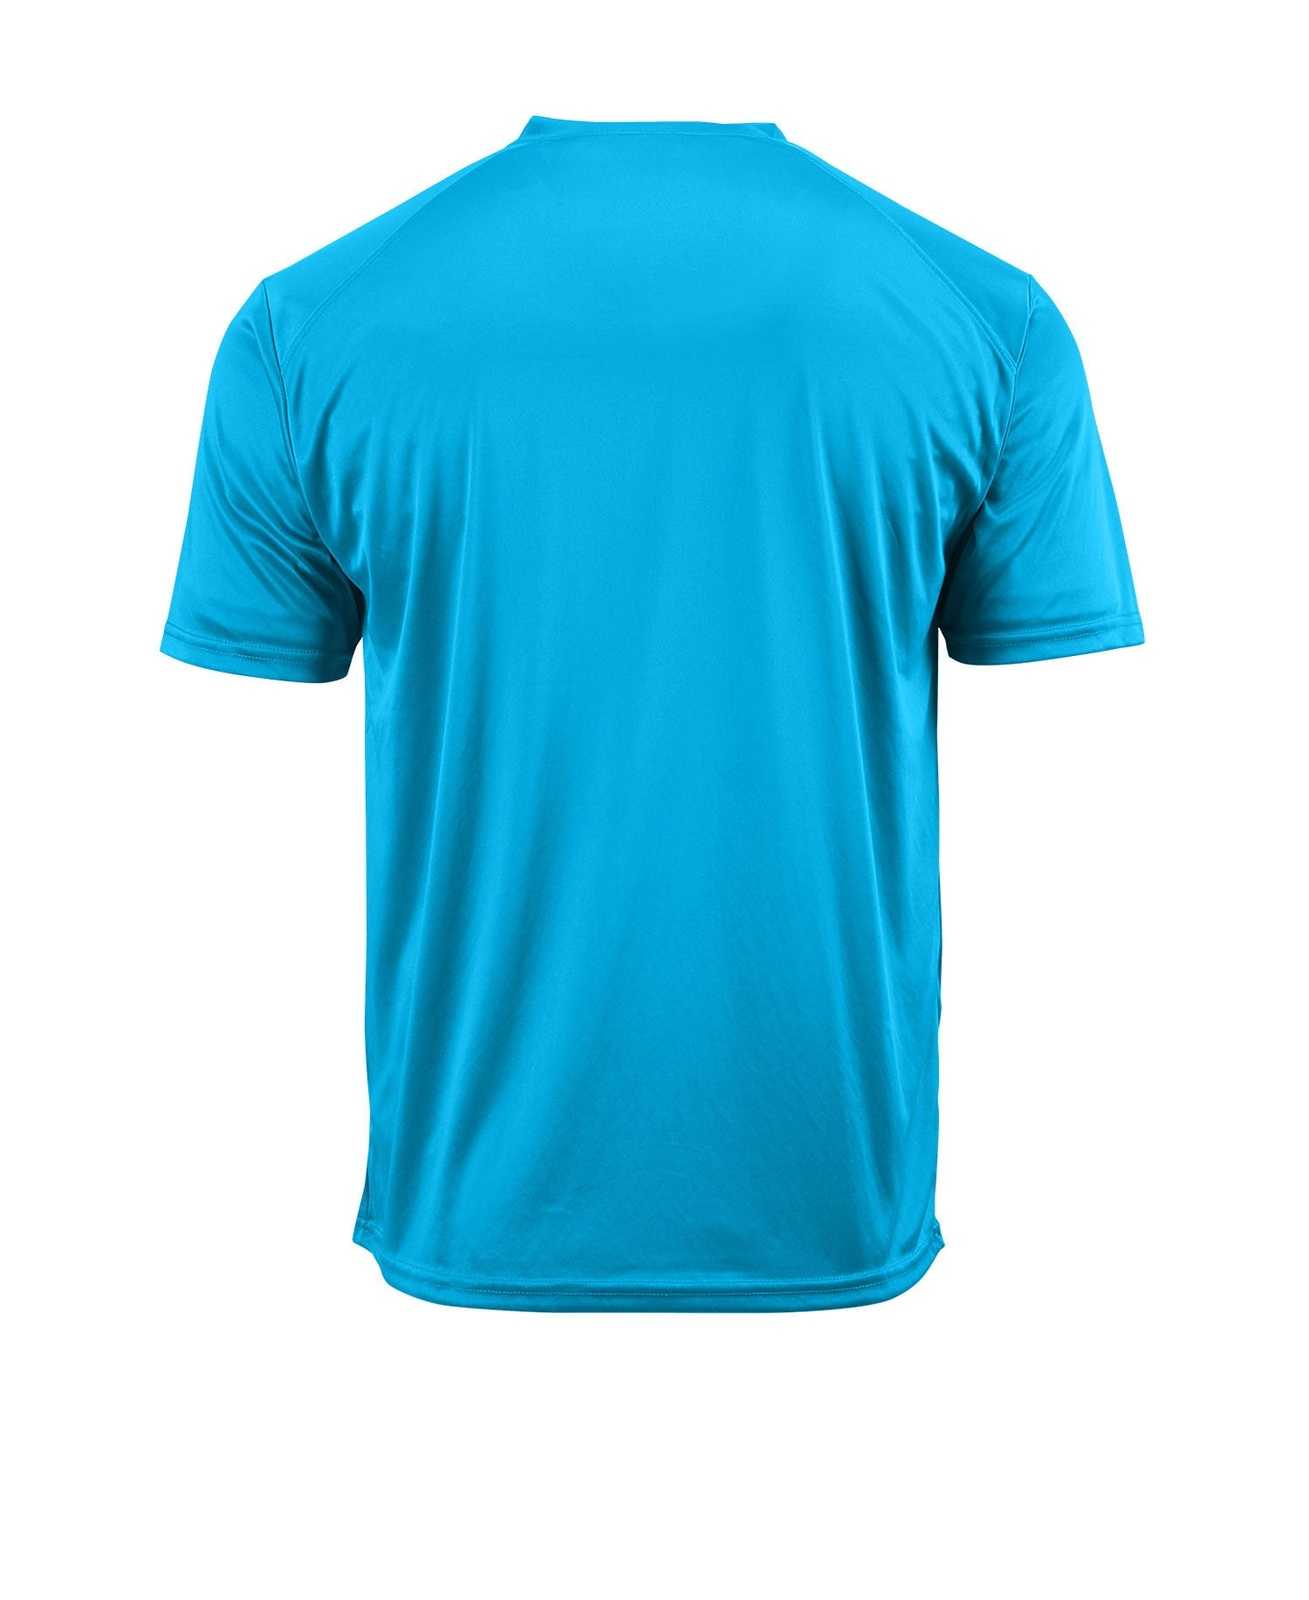 Paragon 200 Adult Performance Tee - Turquoise - HIT a Double